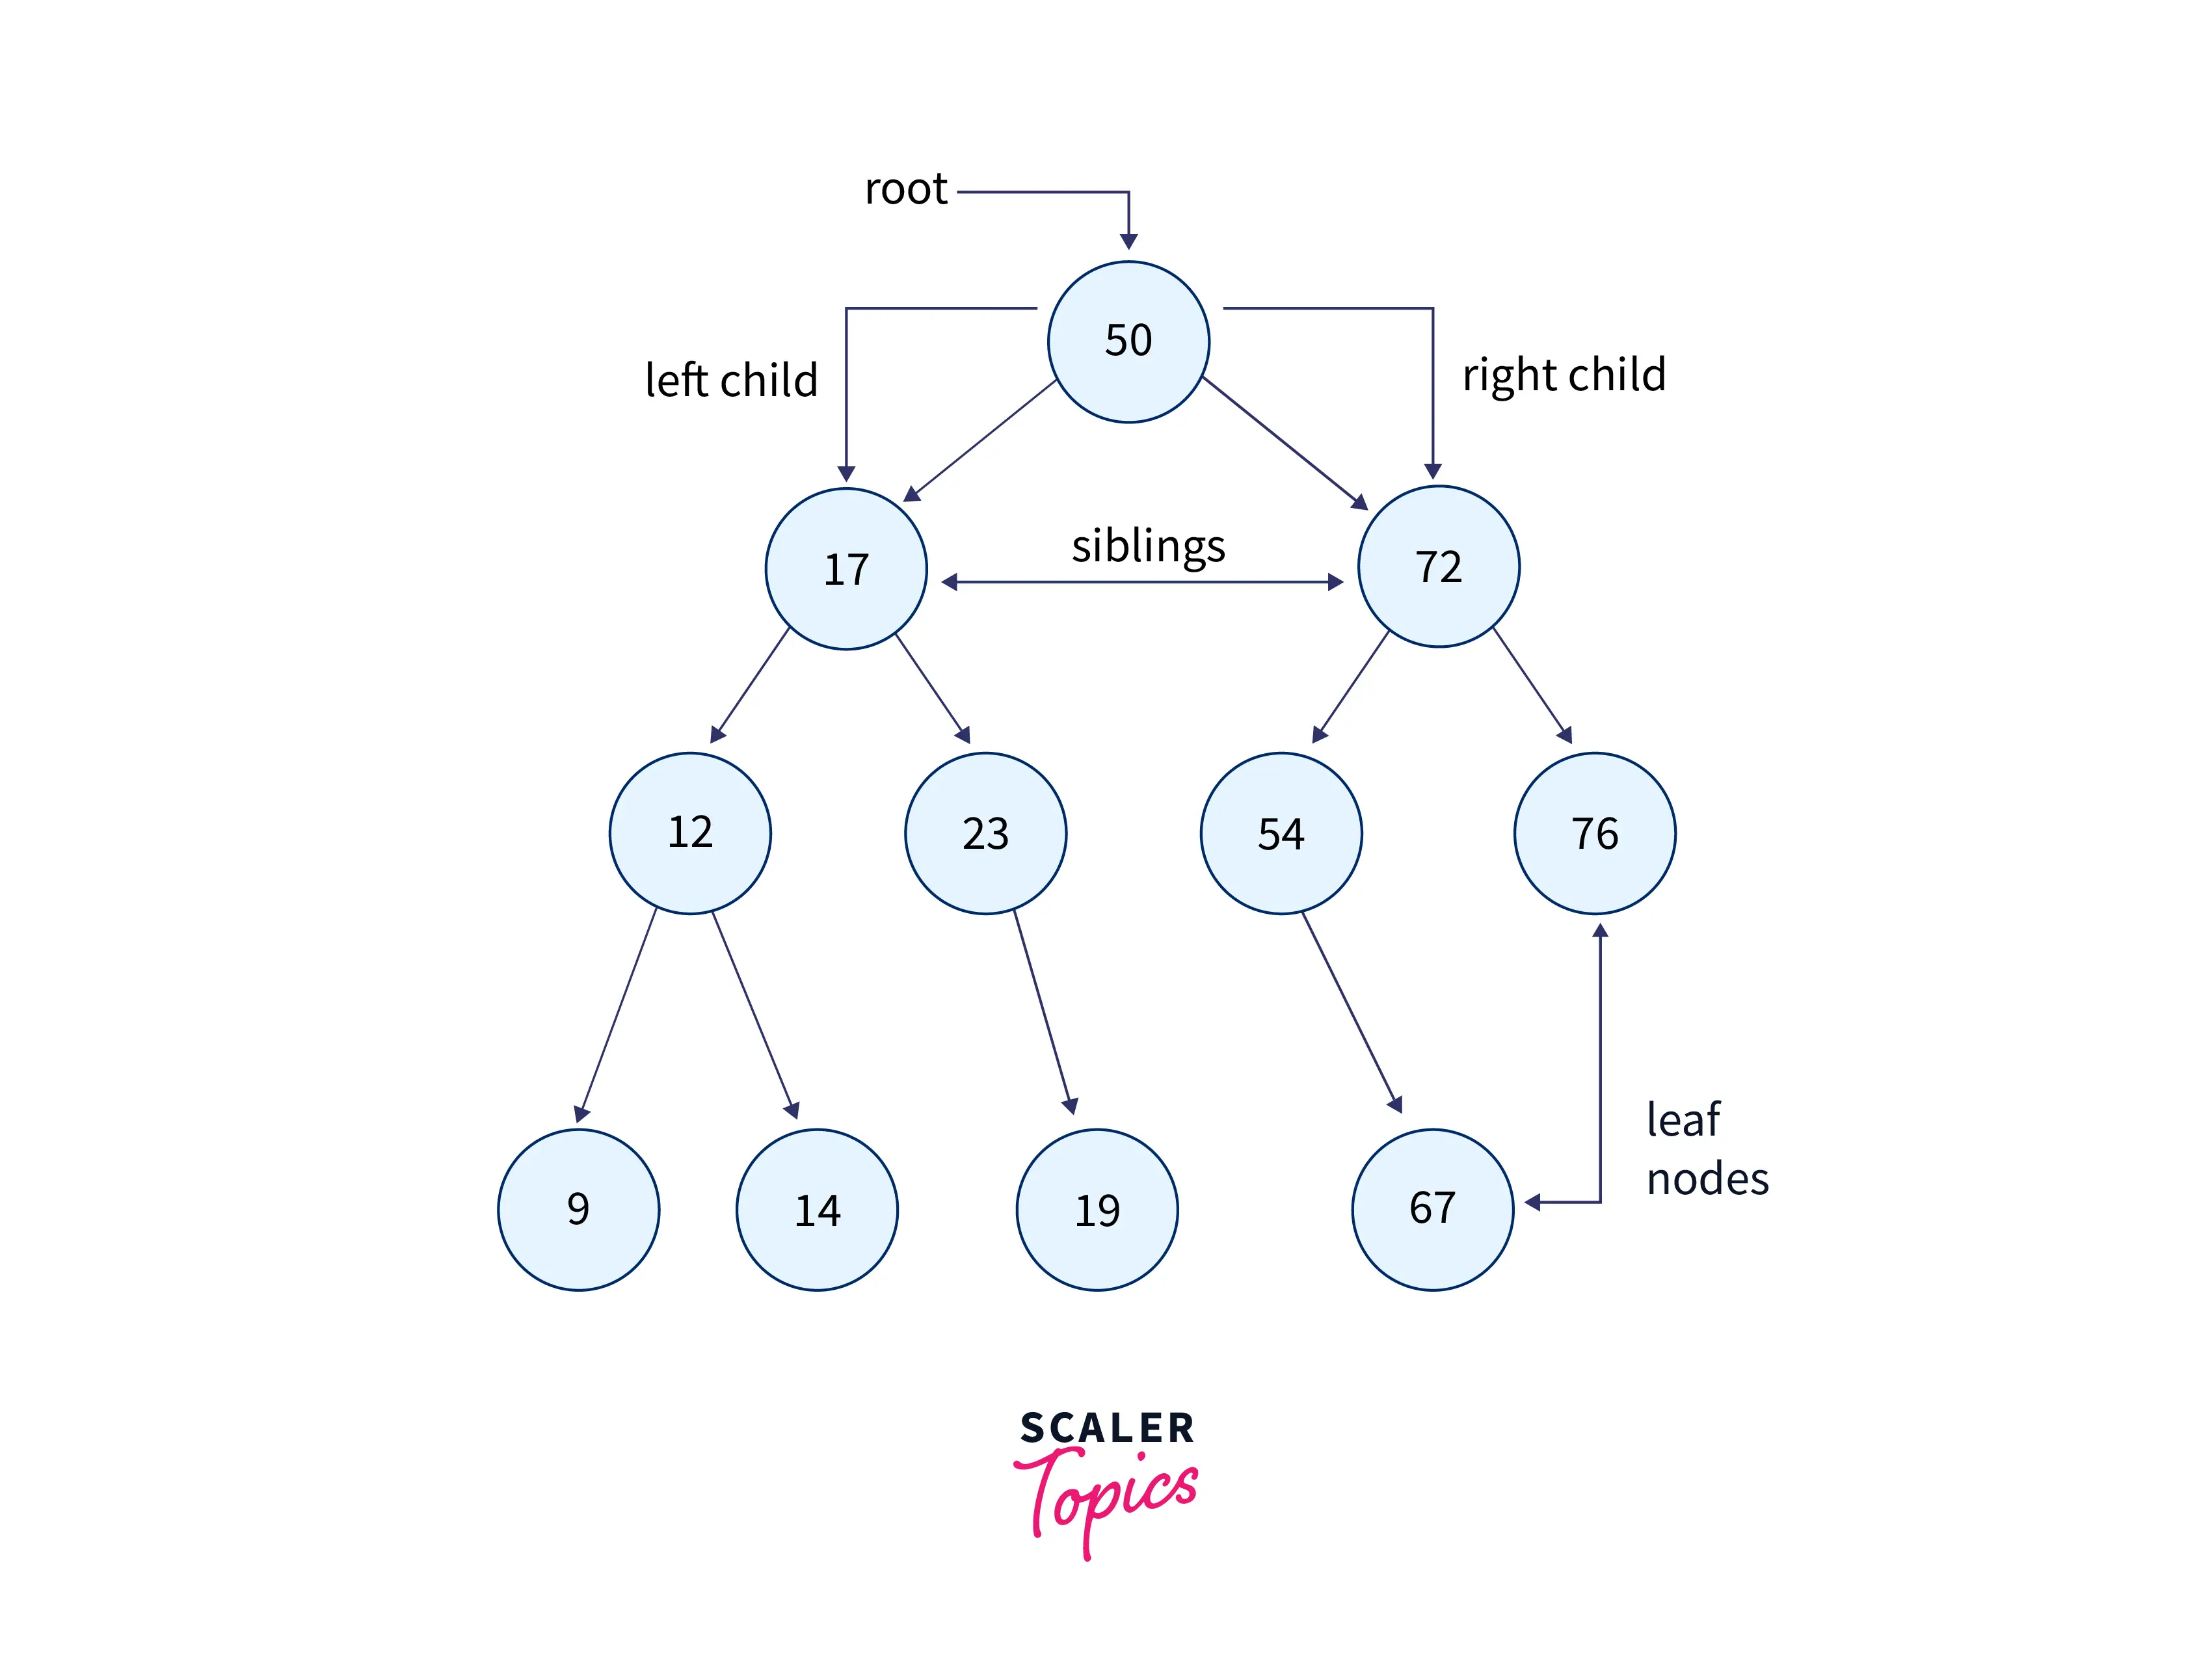 example-tree-showing-root-node-child